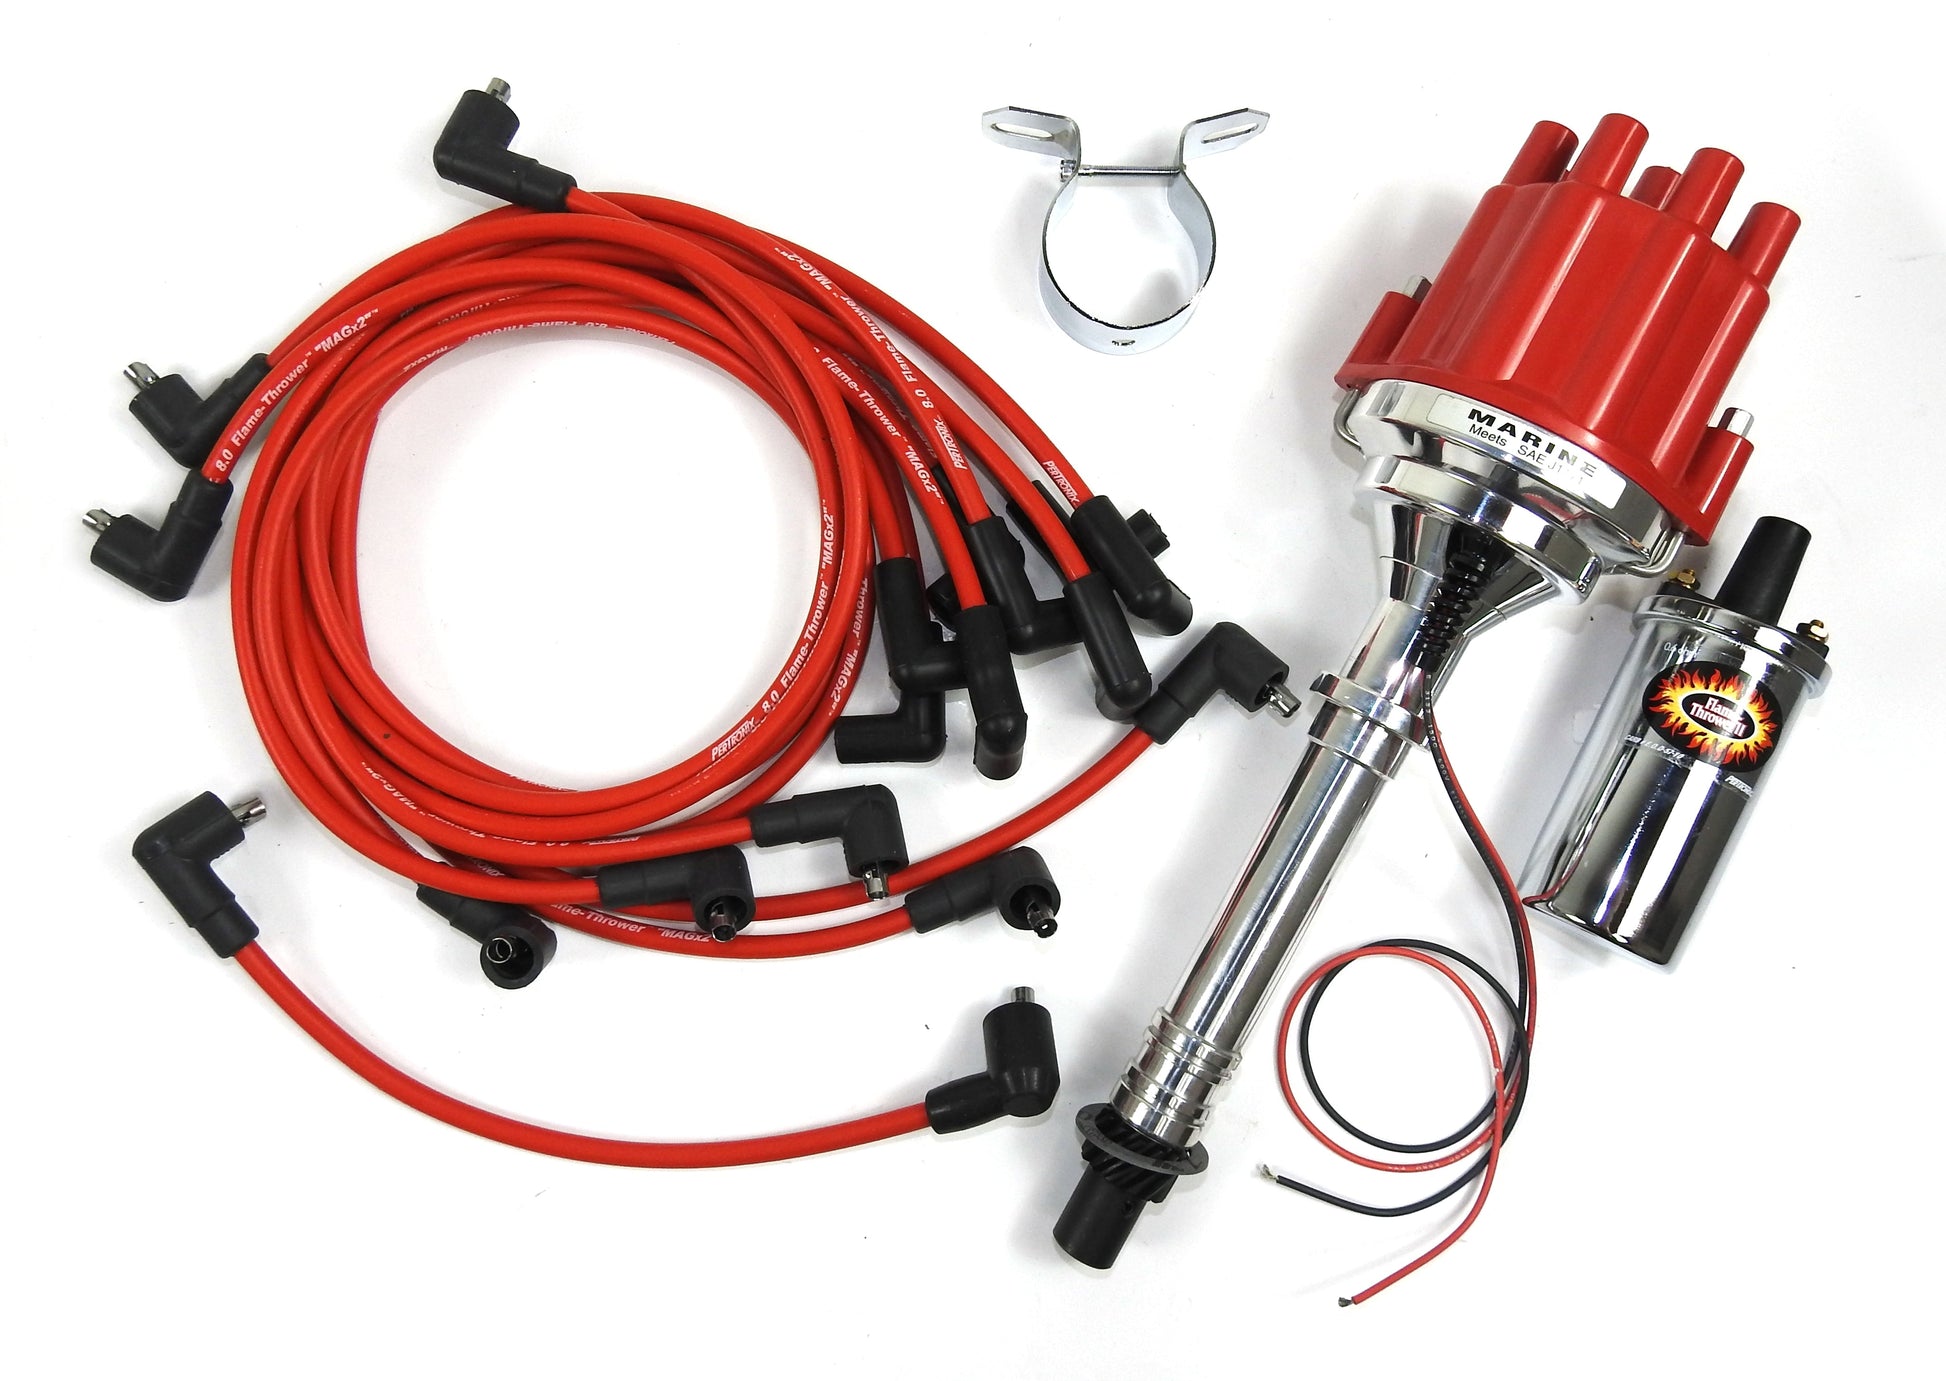 Pertronix Bundle501 Ignition Kit includes Chevy SB/BB Billet Plug n Play Marine Distributor with Red Female Cap, Flame-Thrower II Chrome Coil, Chrome Coil Bracket, Flame-Thrower Marine MAGx2 Universal Red Spark Plug Wires with 90 degree plug boot ends